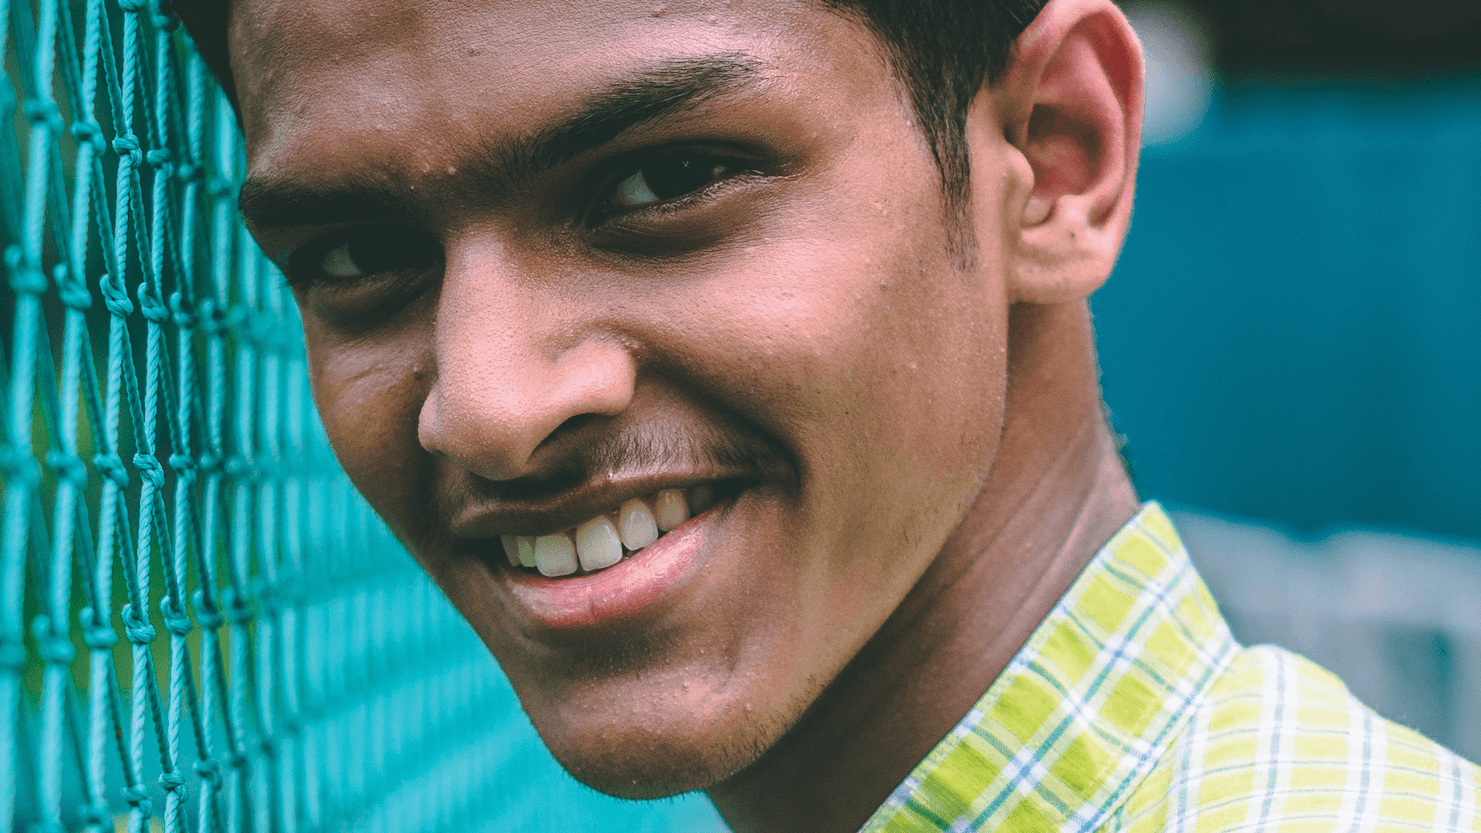 Abhijeet, a young man from India